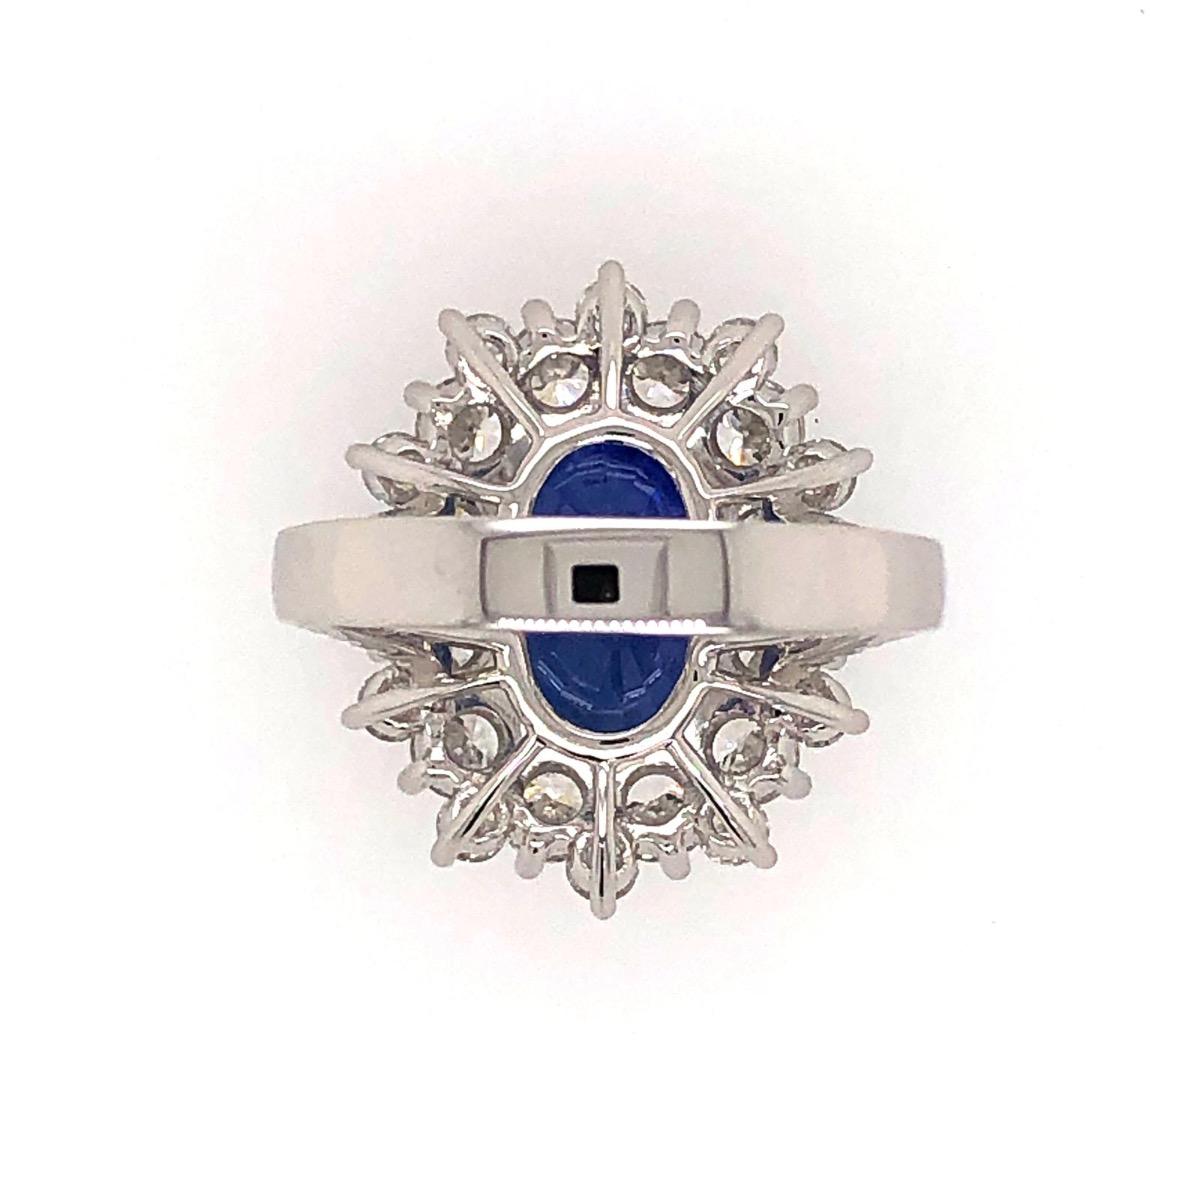 Style: Blue Sapphire Ring with White Diamonds and Diamond on the Shanks 

Metal type:  18kt White Gold 

1 7.03ct Blue Oval Sapphire 

52 total 2.79ct Radiant White Diamonds  
  
Location Of Stone: Madagascar   

Has 1 CDC Certificate. CDC Number: